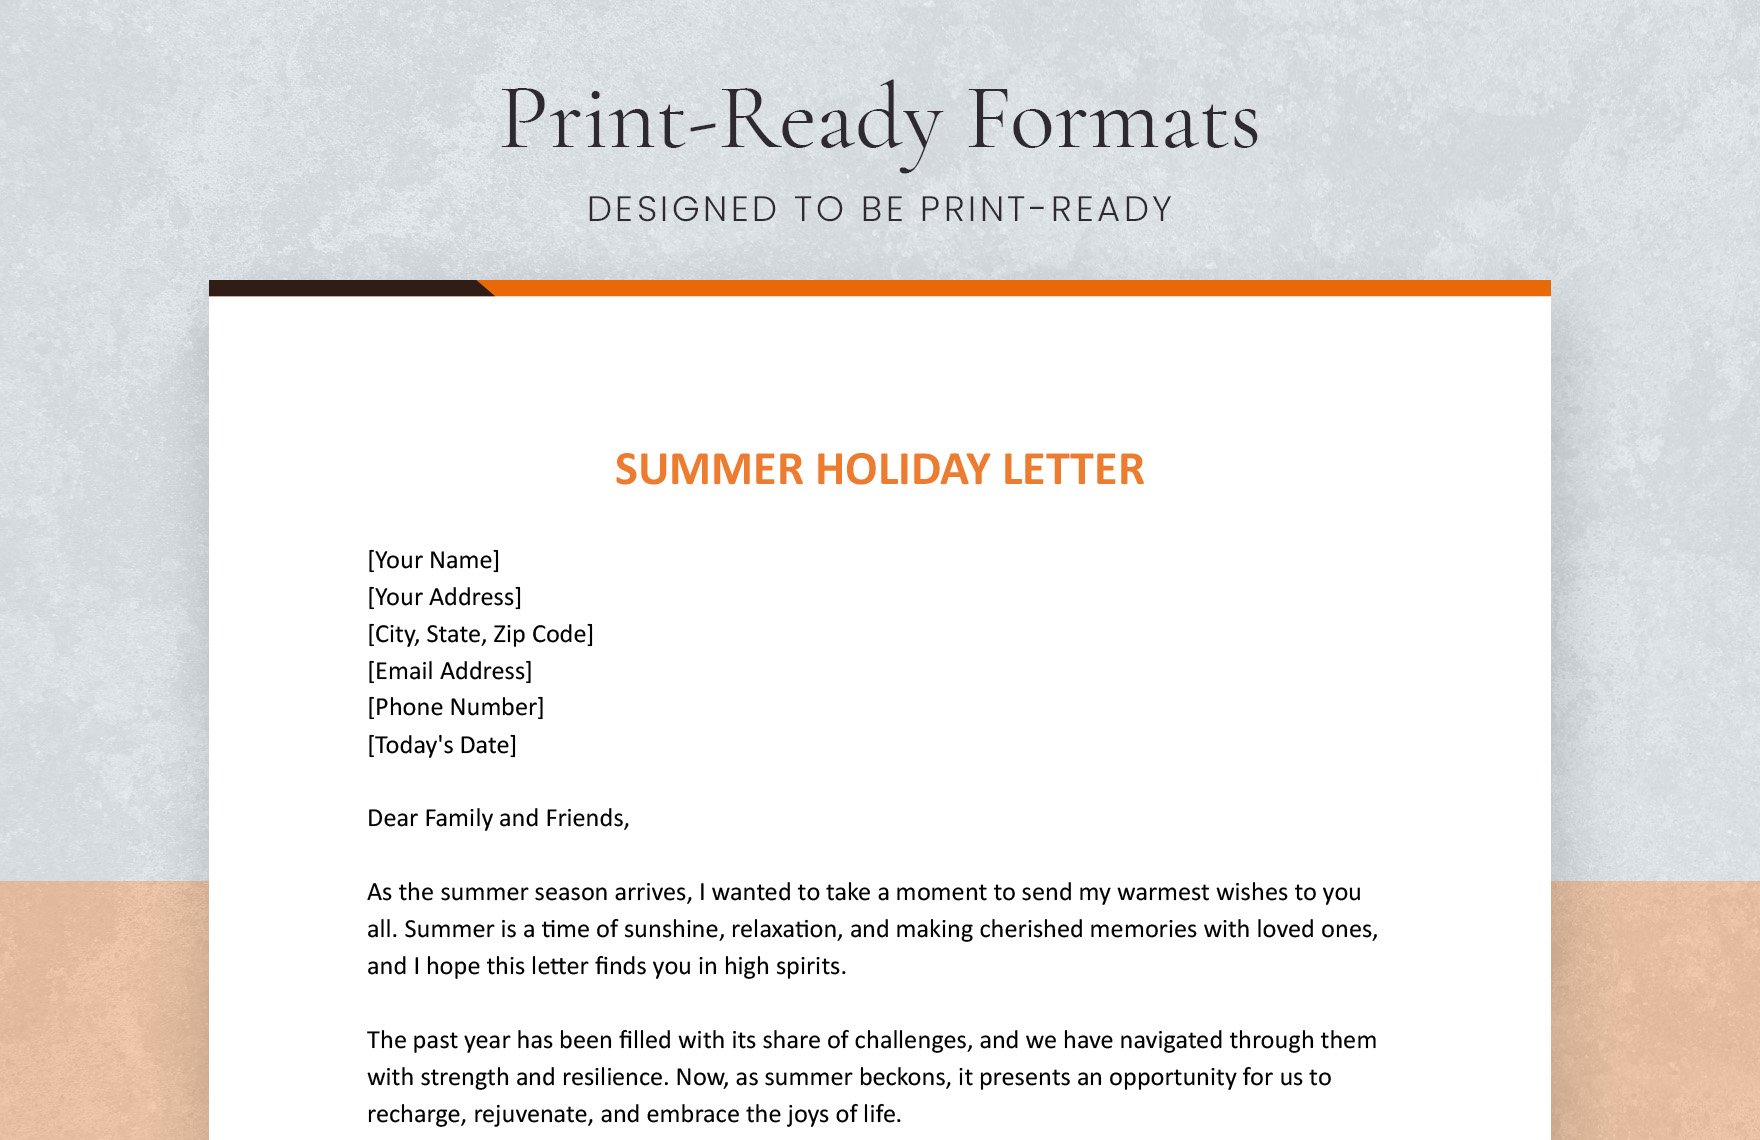 Summer Holiday Letter